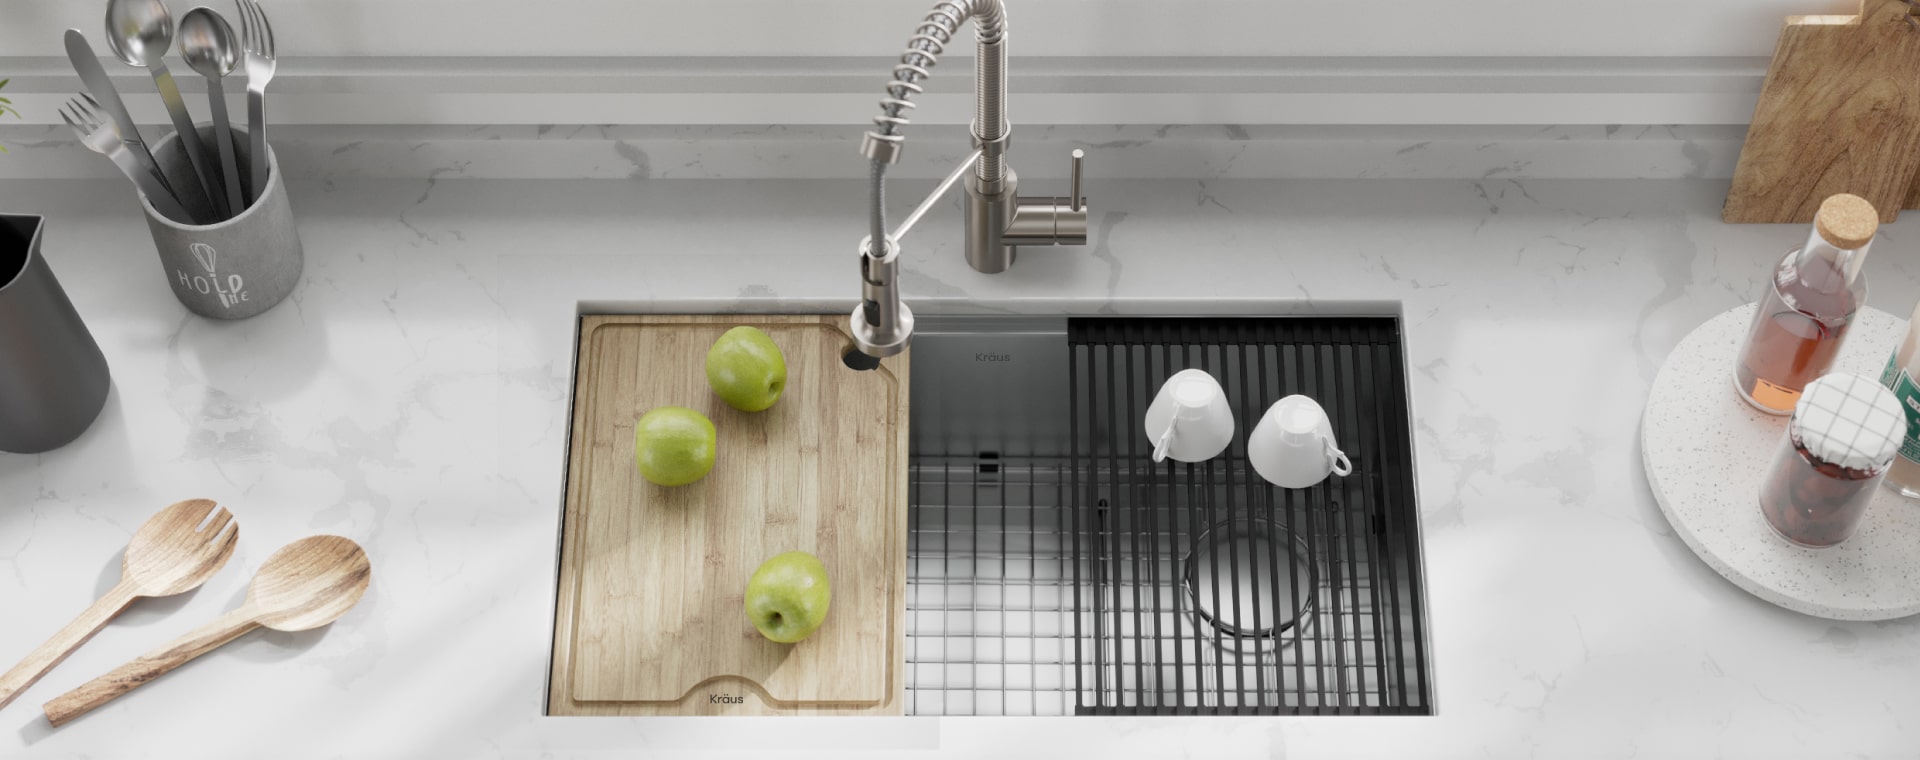 Workstation sink: Learn about the benefits of using a versatile sink